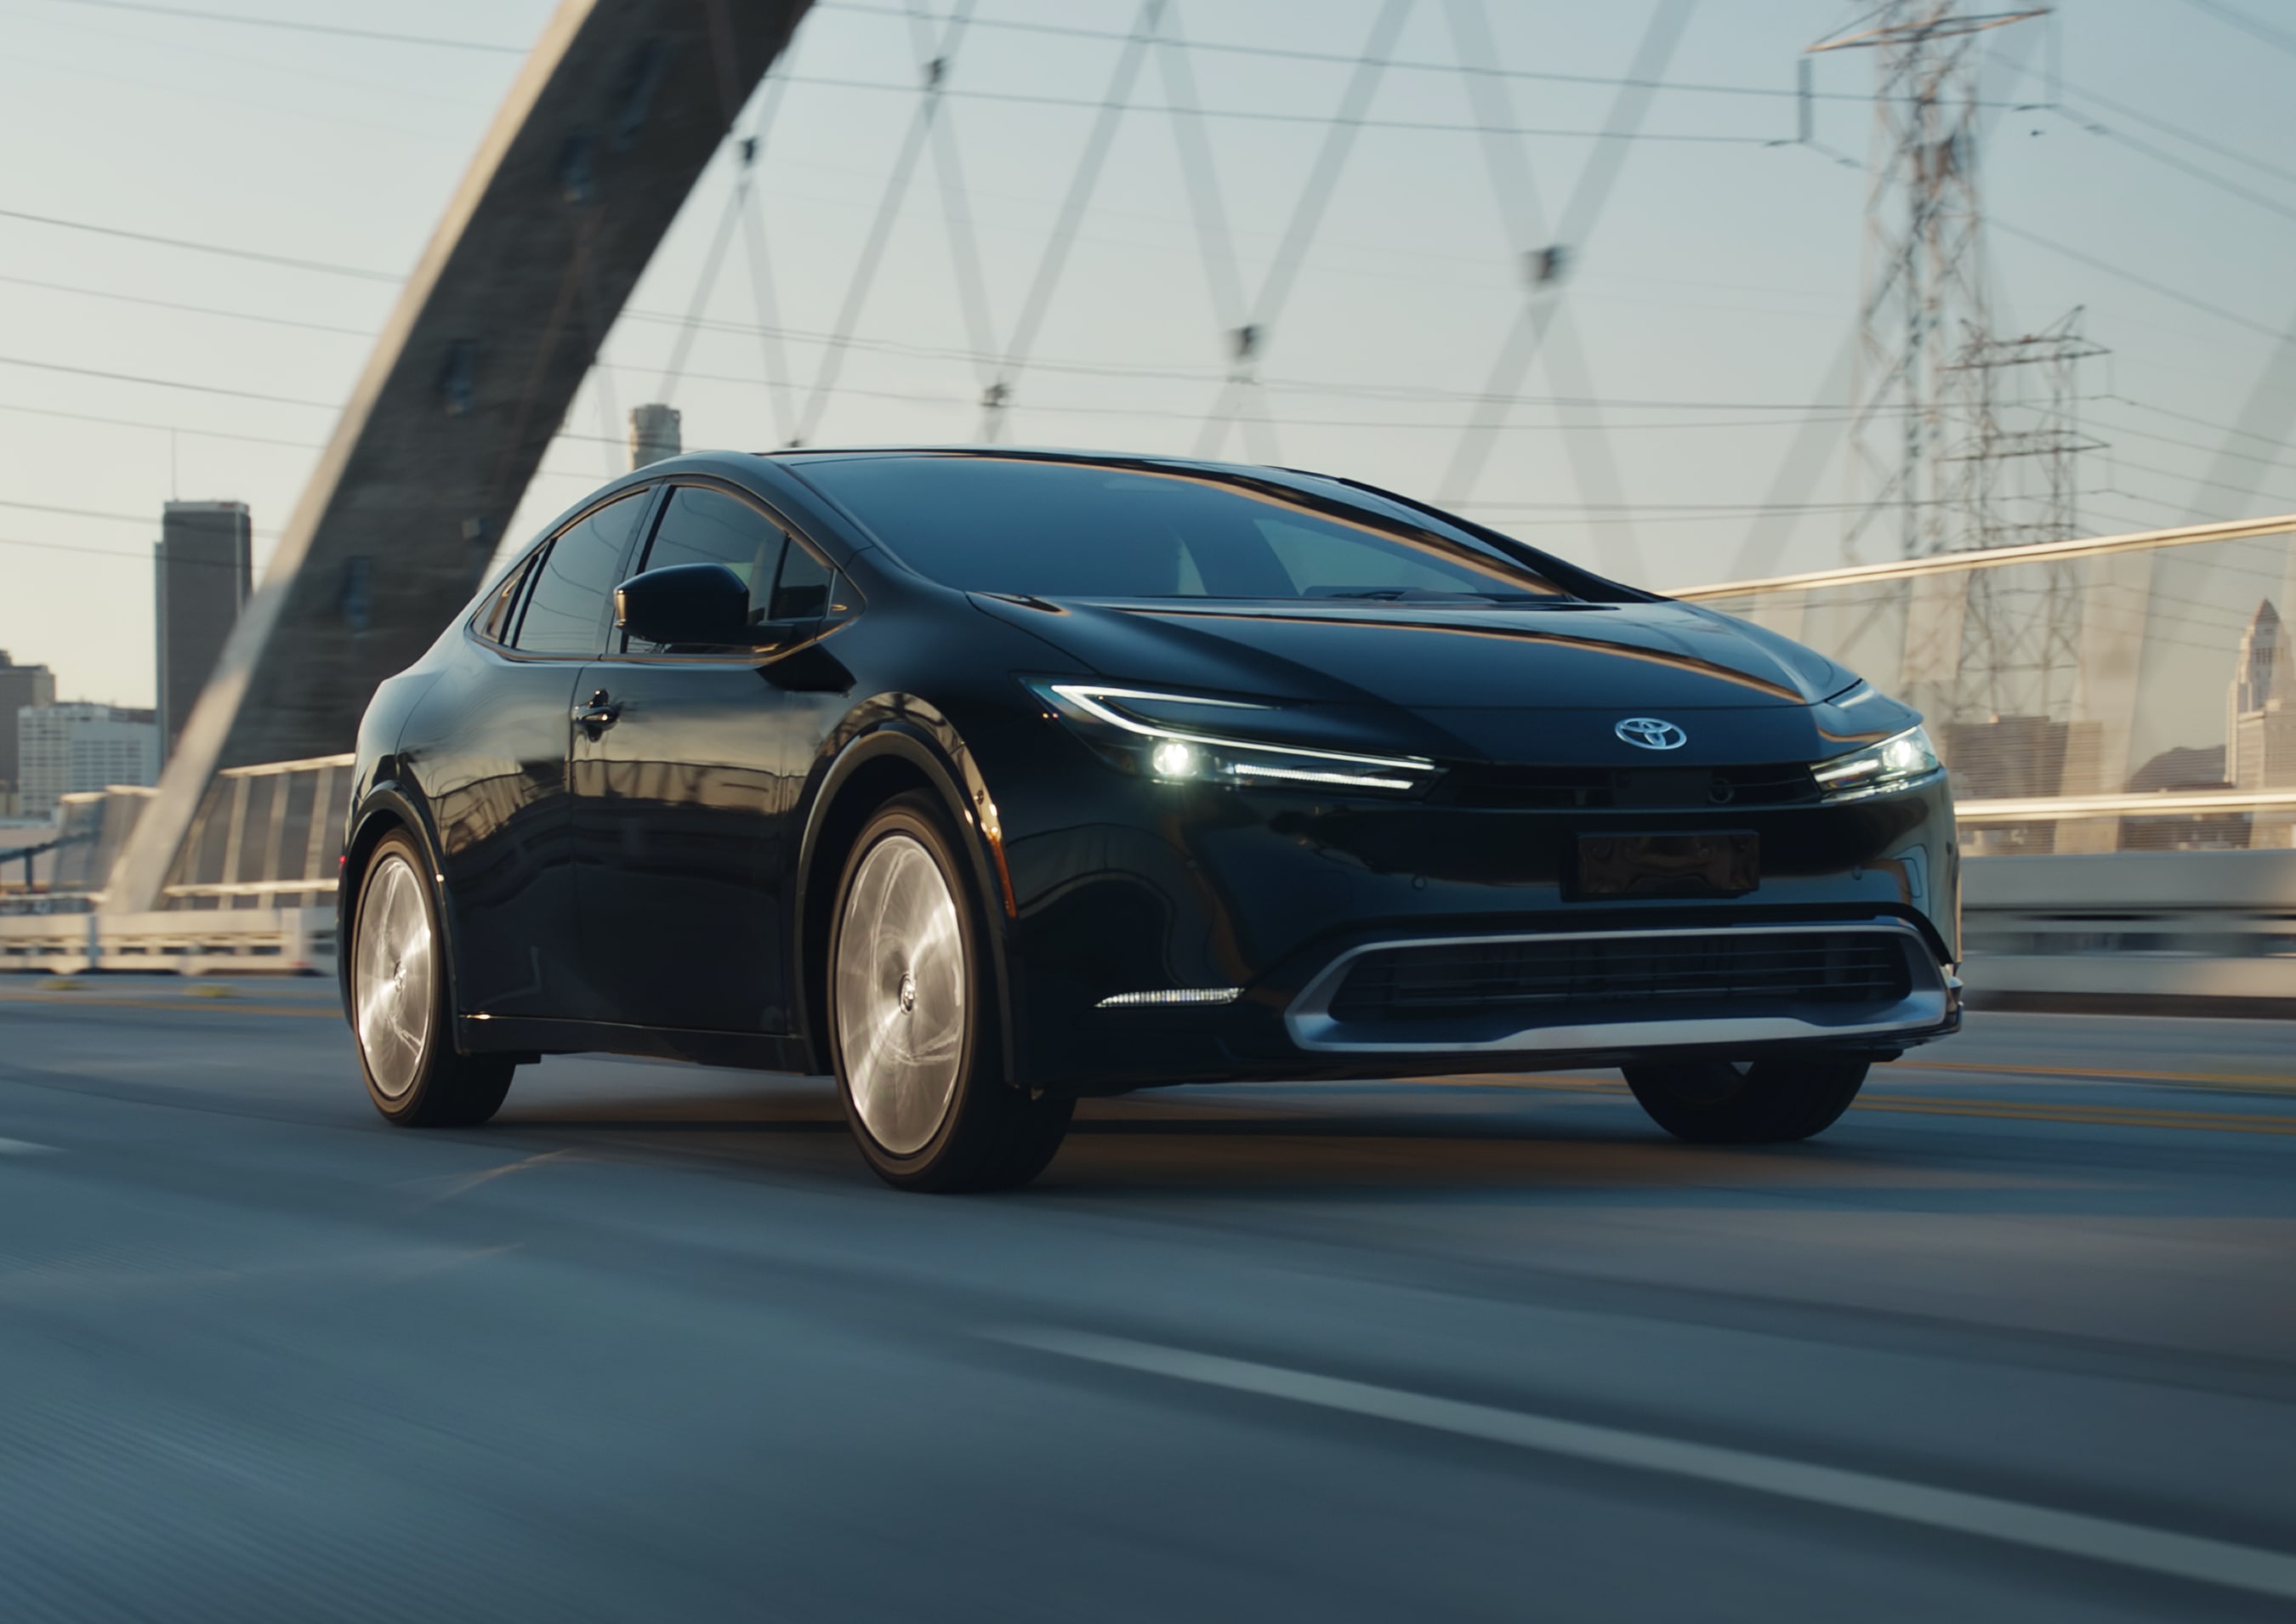 Toyota’s spot “Black Sheep” was developed by Saatchi & Saatchi as part of the integrated 2023 Prius and Prius Prime campaign, “This is Prius Now.”